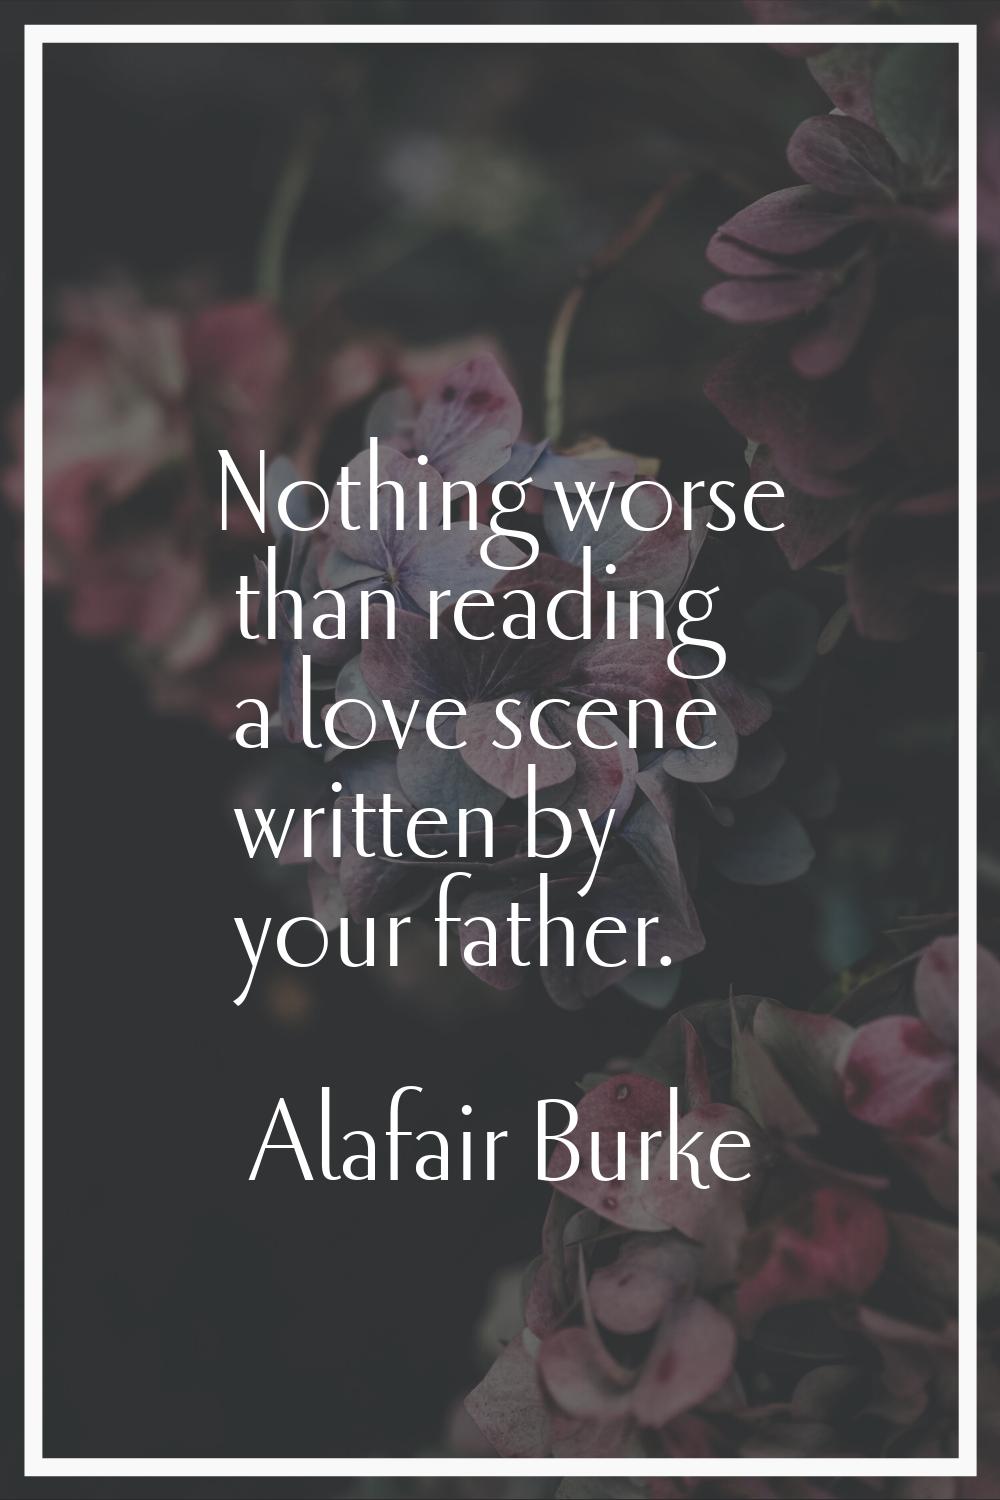 Nothing worse than reading a love scene written by your father.